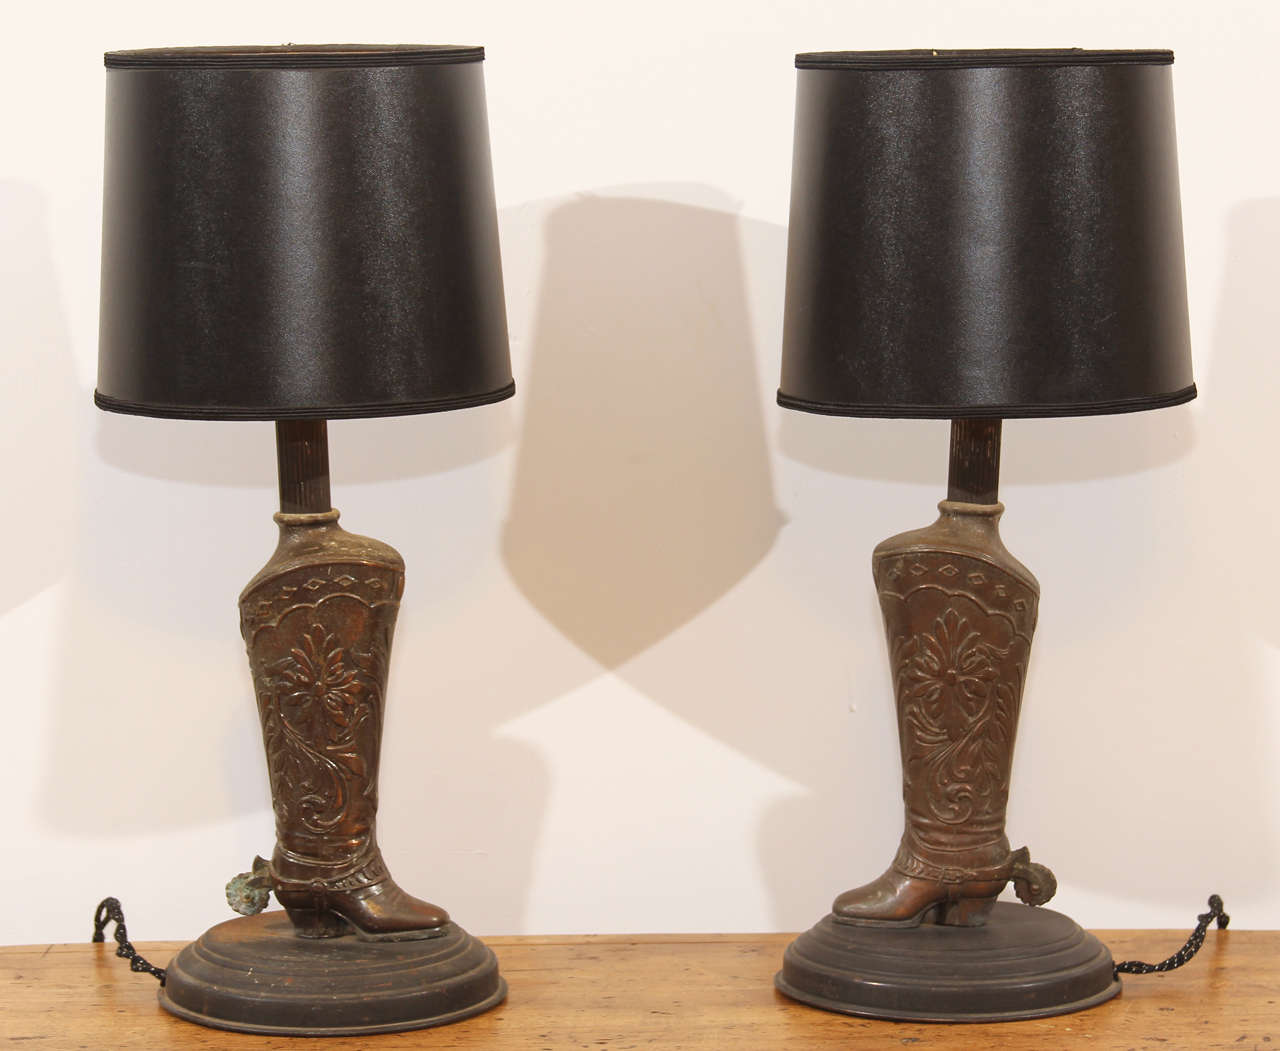 Embossed brass with floral patterns, an exaggerated sense of proportion and a right proper set of spurs make for a cheeky pair of casual table lamps for just the right Western atmosphere:  ranch home, mountain cabin or guest room.  We've rewired